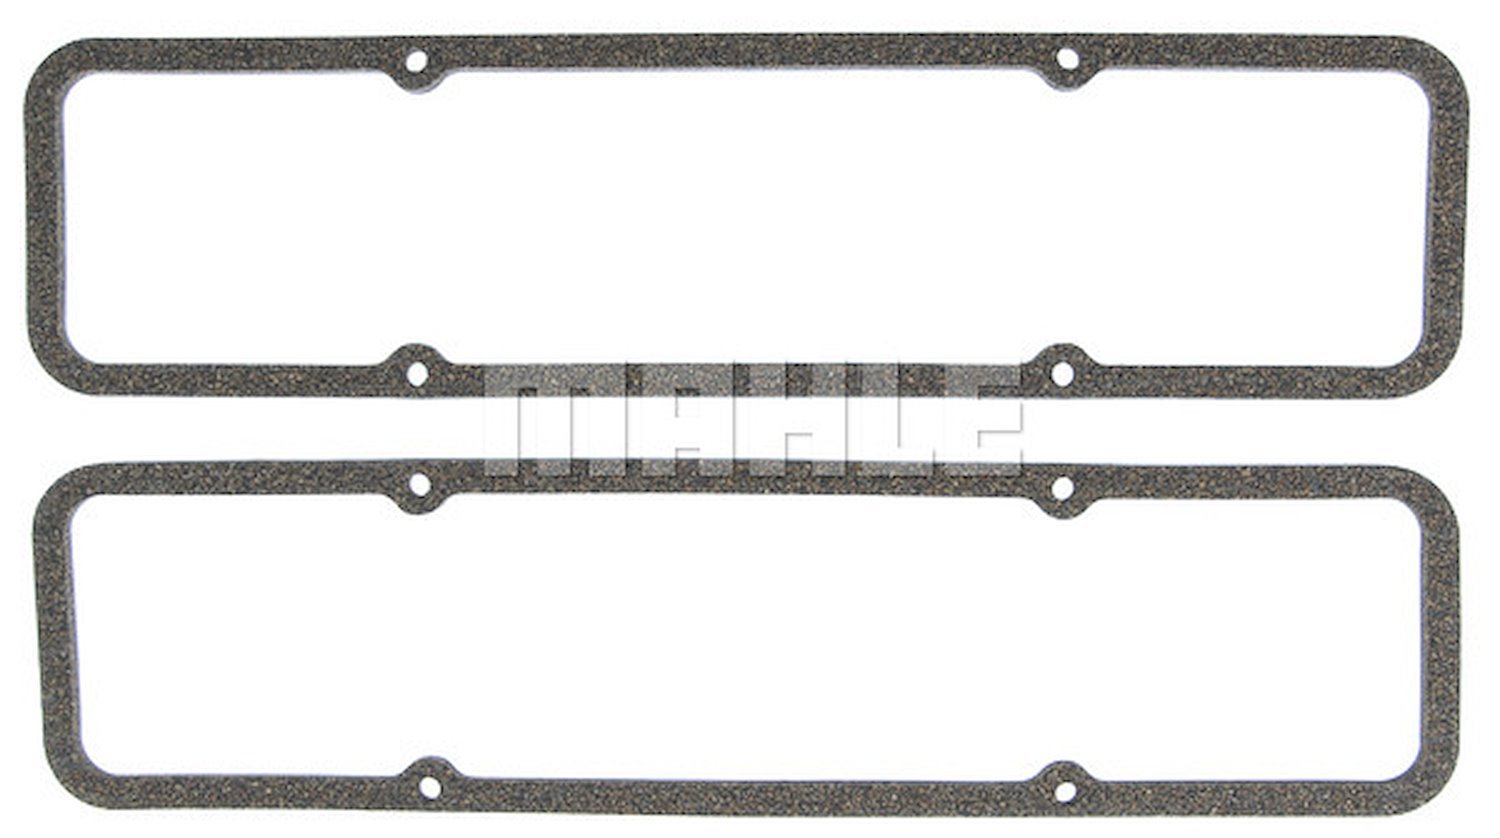 Valve Cover Gasket Set for Small Block Chevy